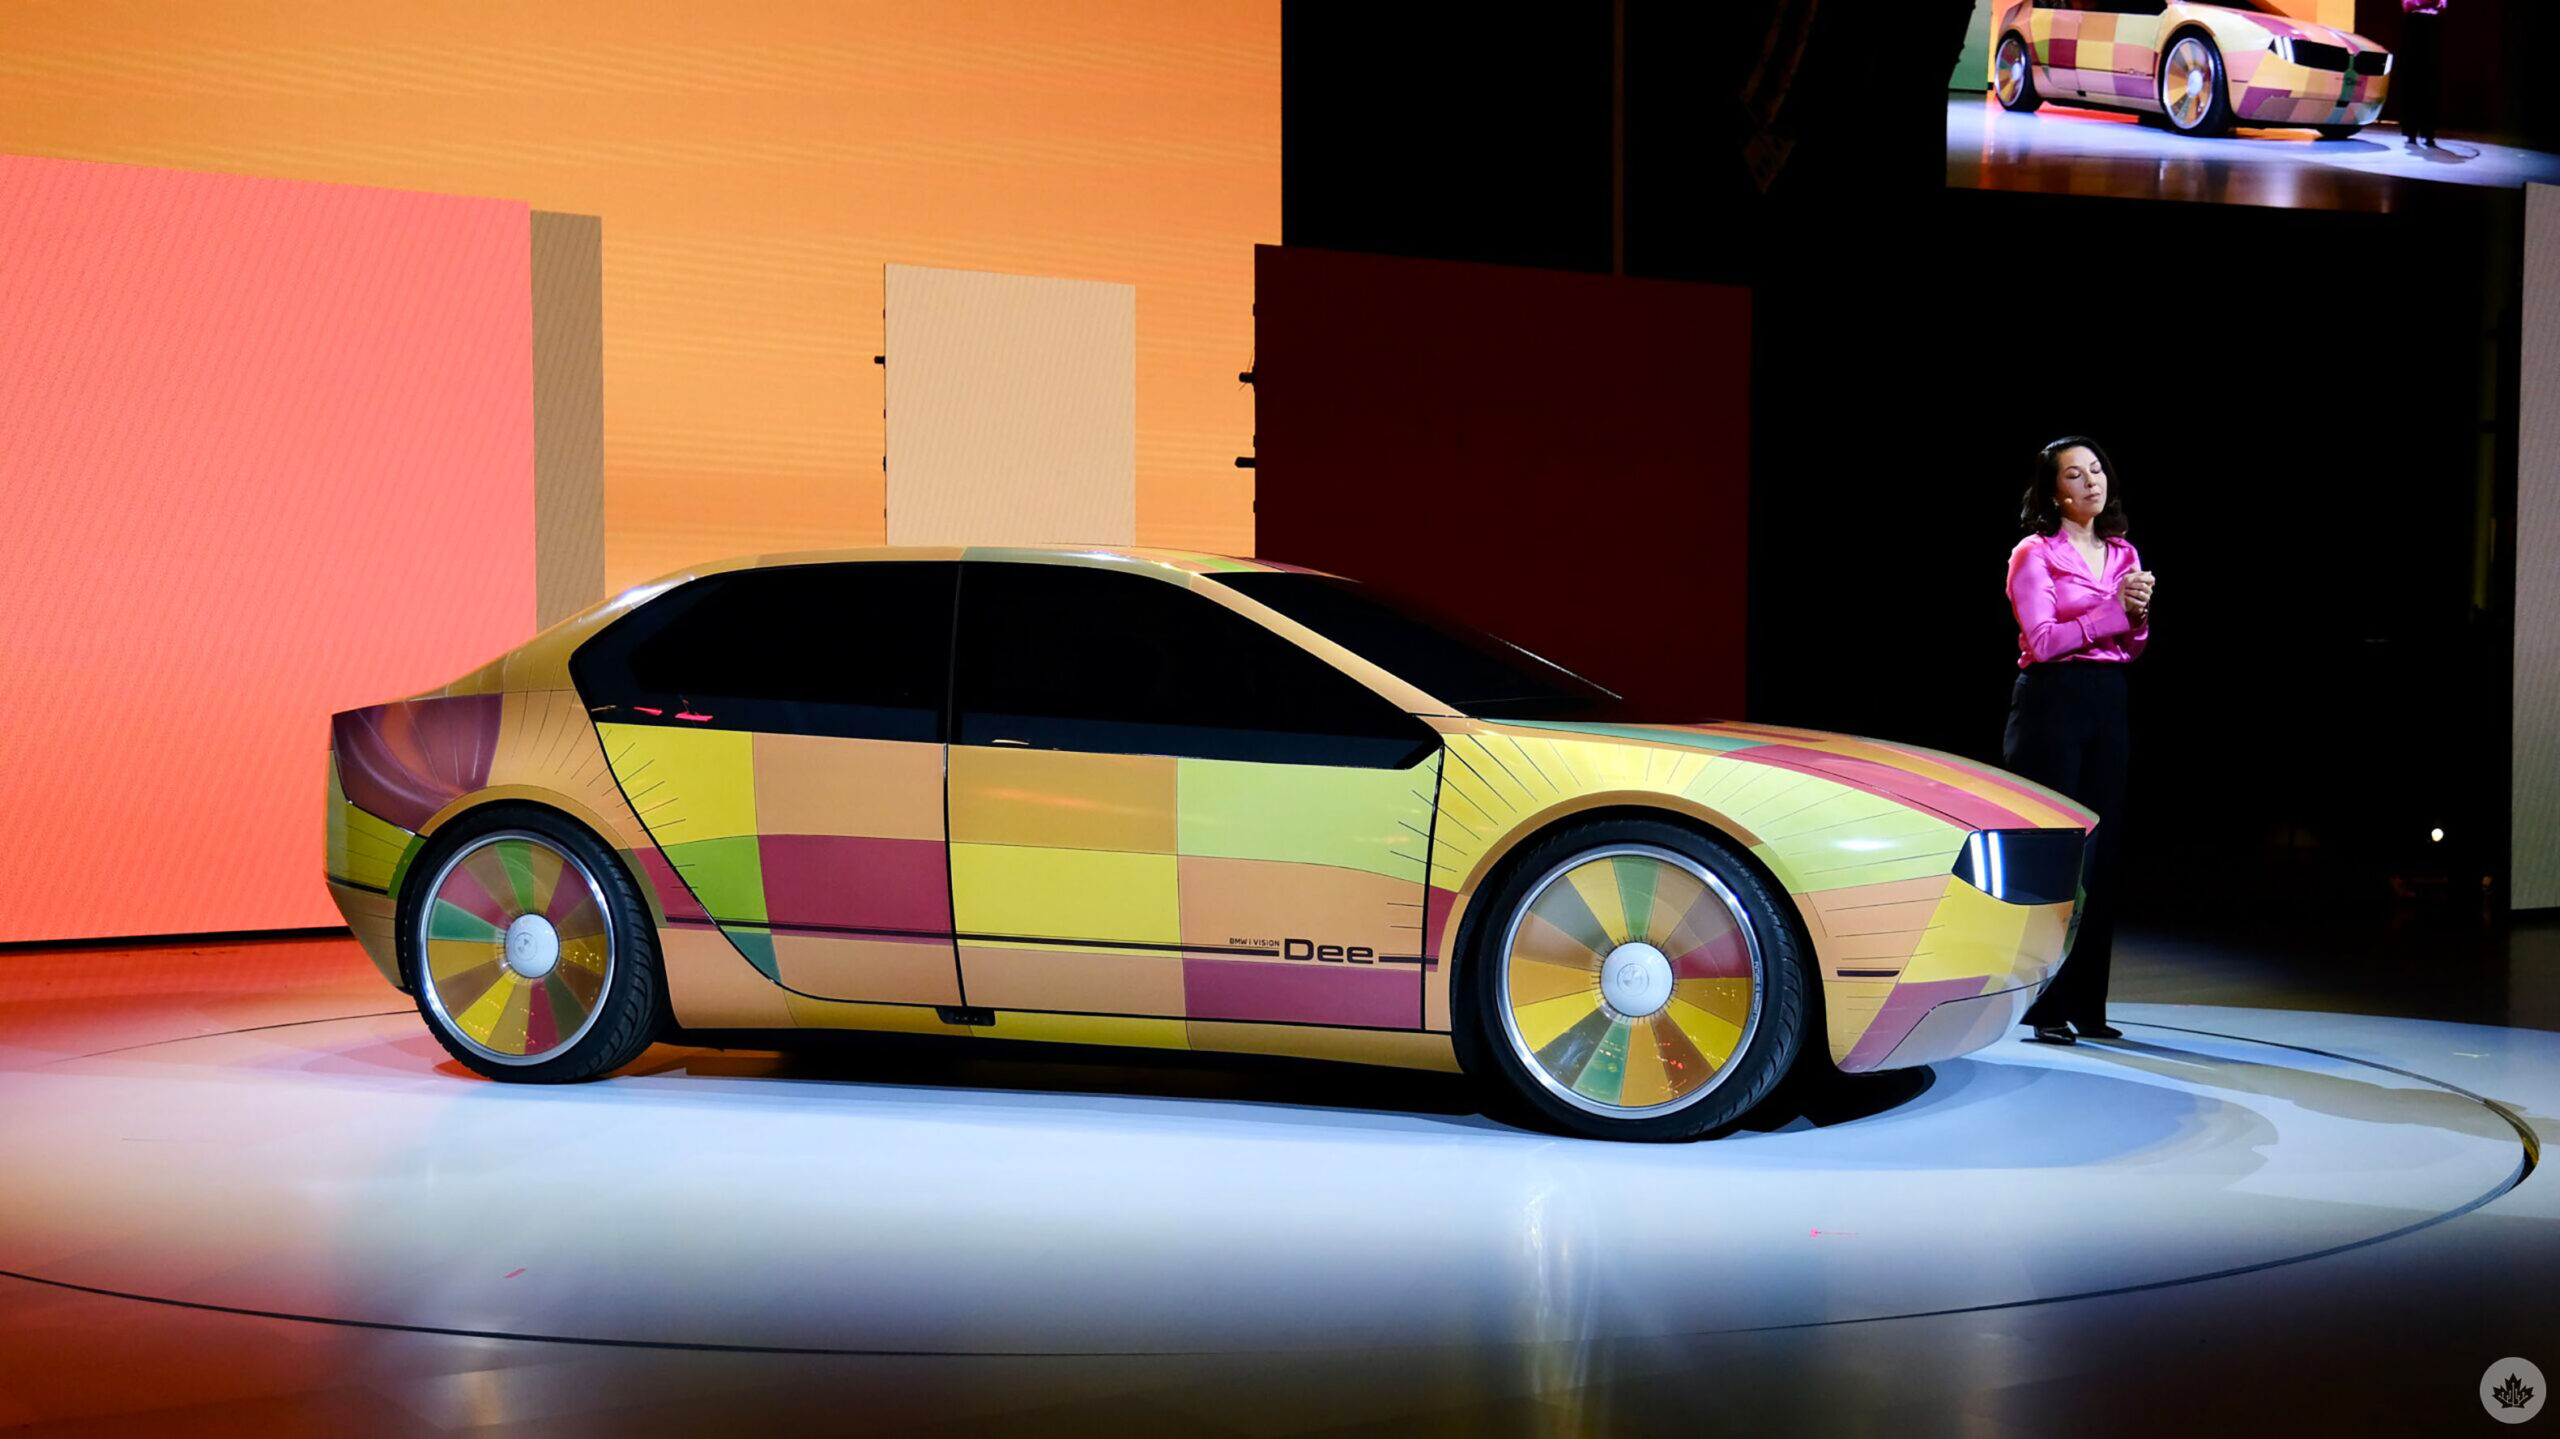 This BMW can change between 32 colours and represents the future